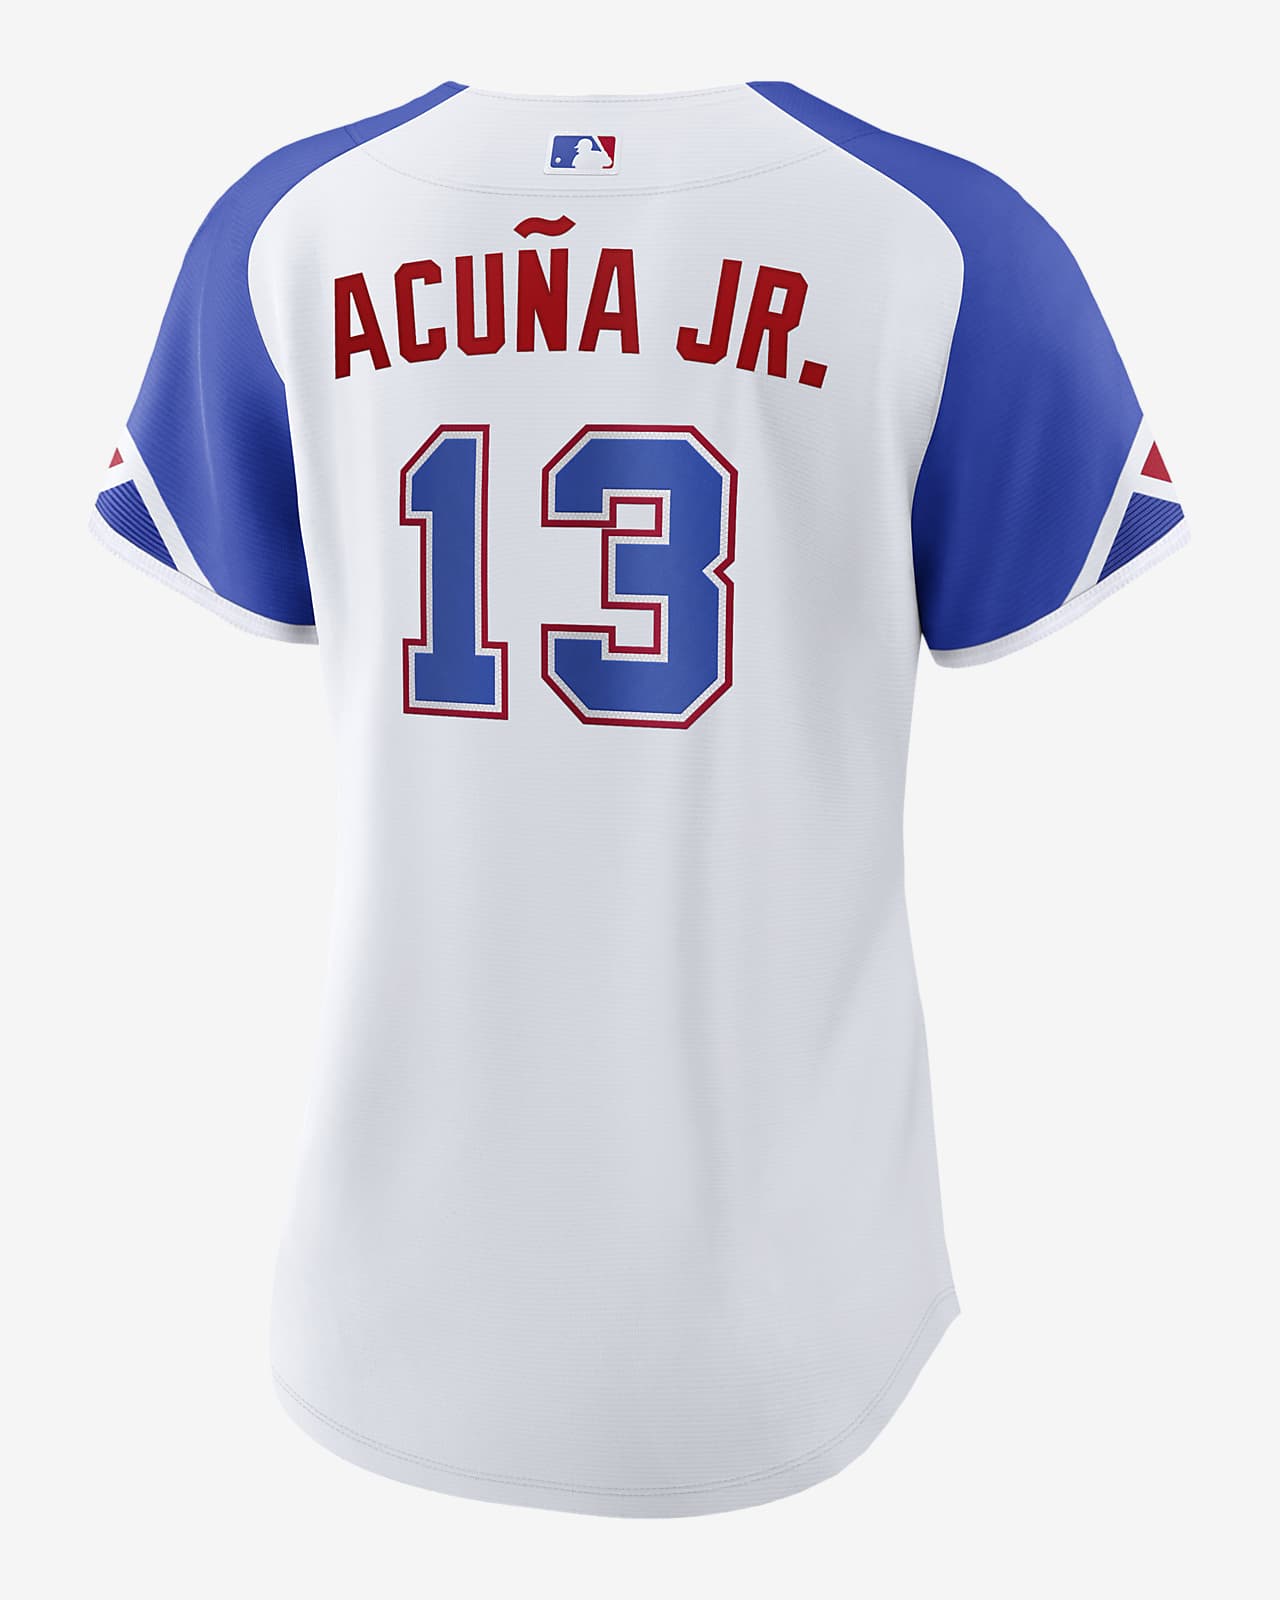 acuna jr jersey youth red